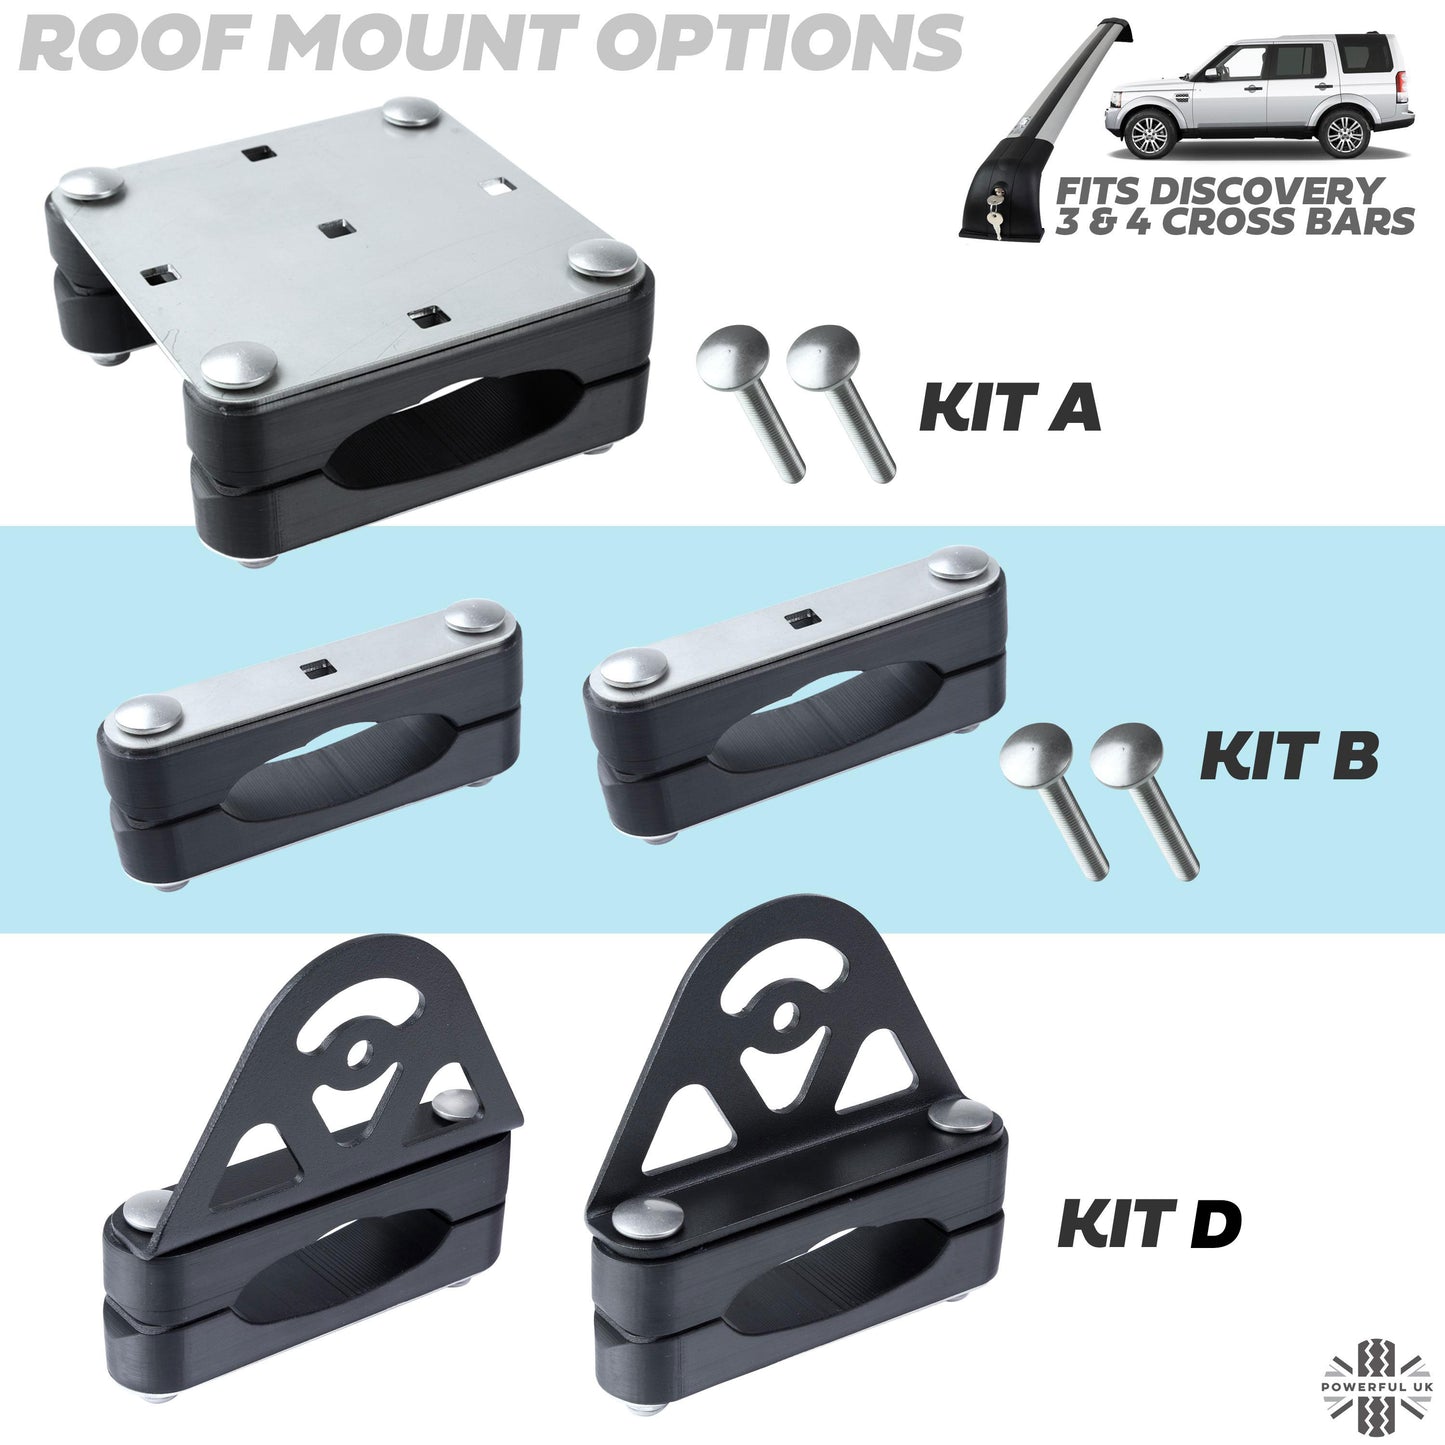 CROSS BAR Mount Clamp Kit for the Land Rover Discovery 3/4 - Kit D (Black)